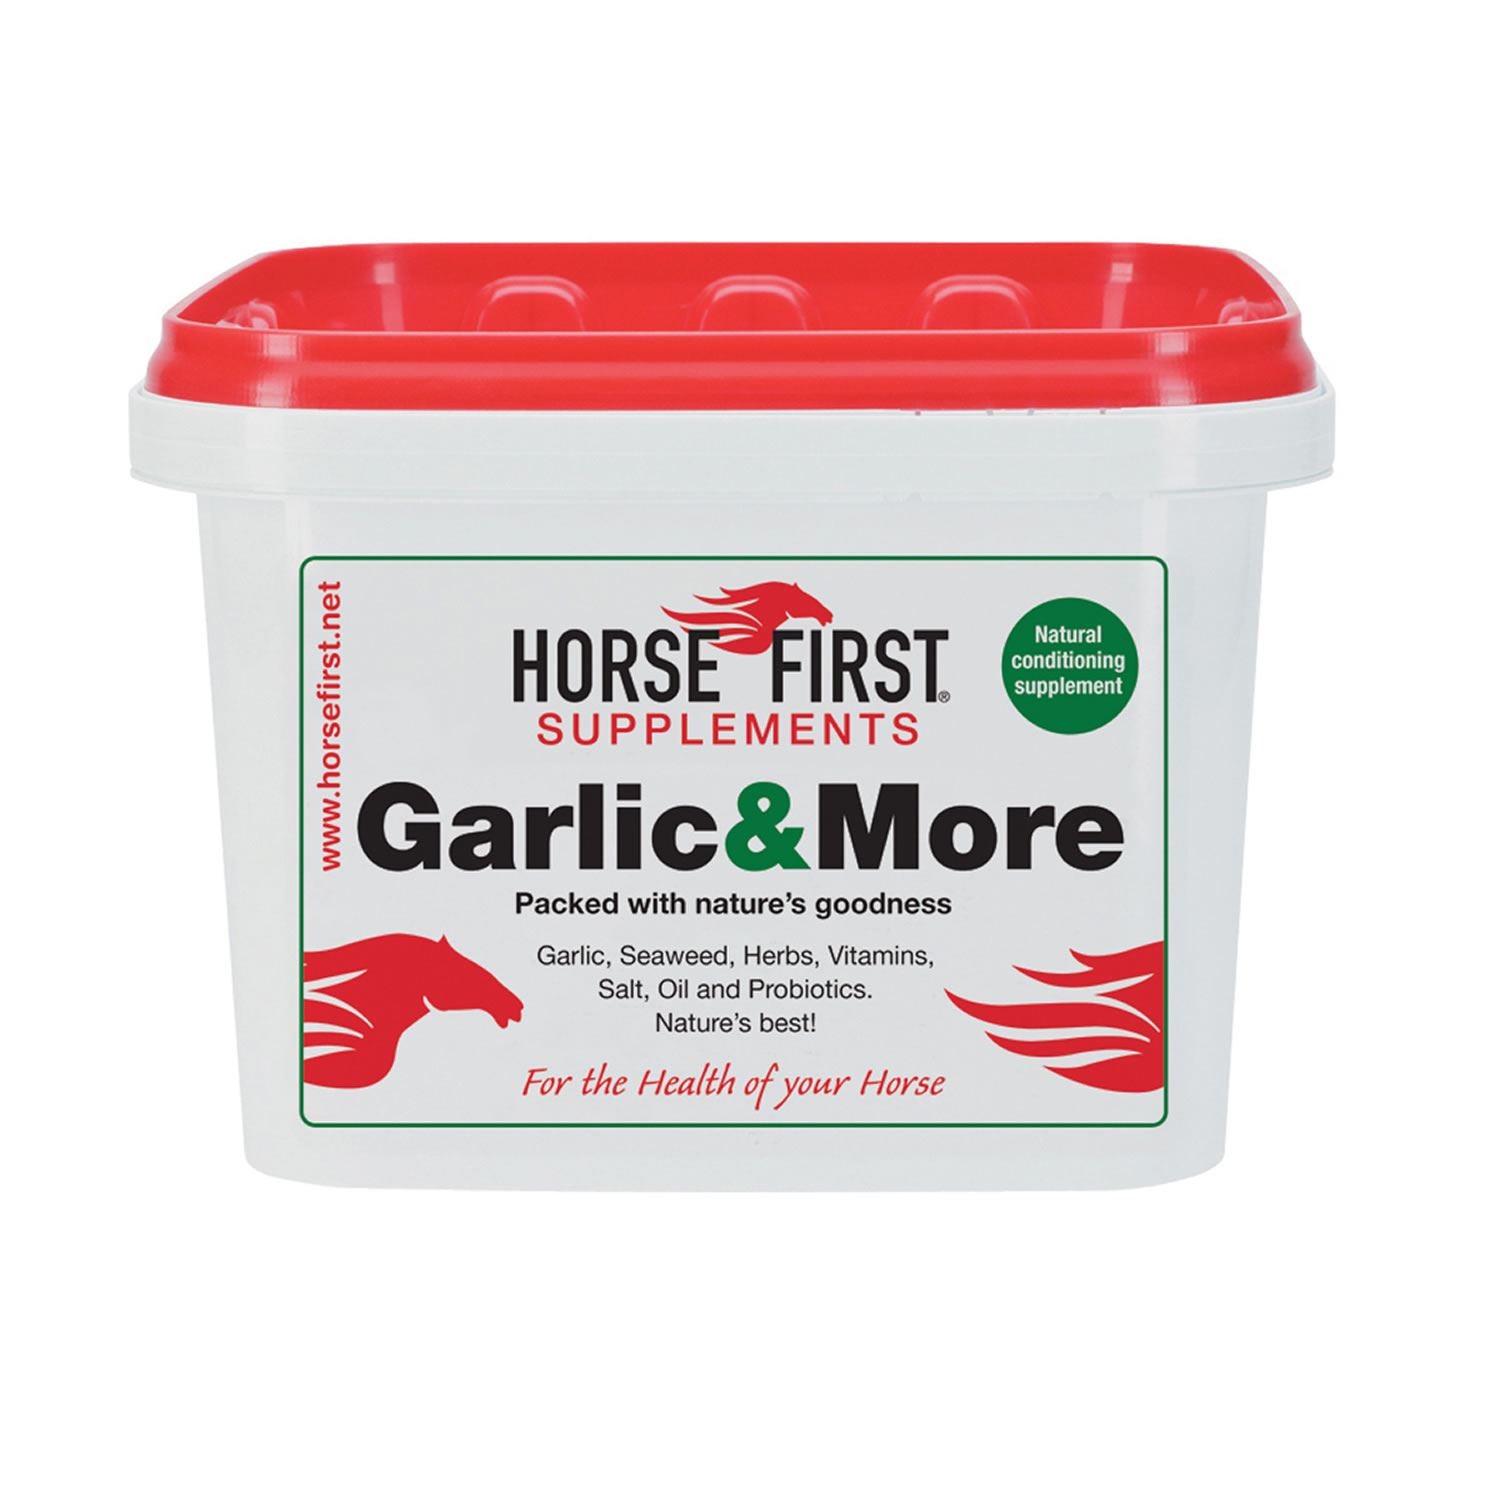 HORSE FIRST GARLIC & MORE, nature's goodness packed into a supplement for conditioning and aiding the digestive and immune systems